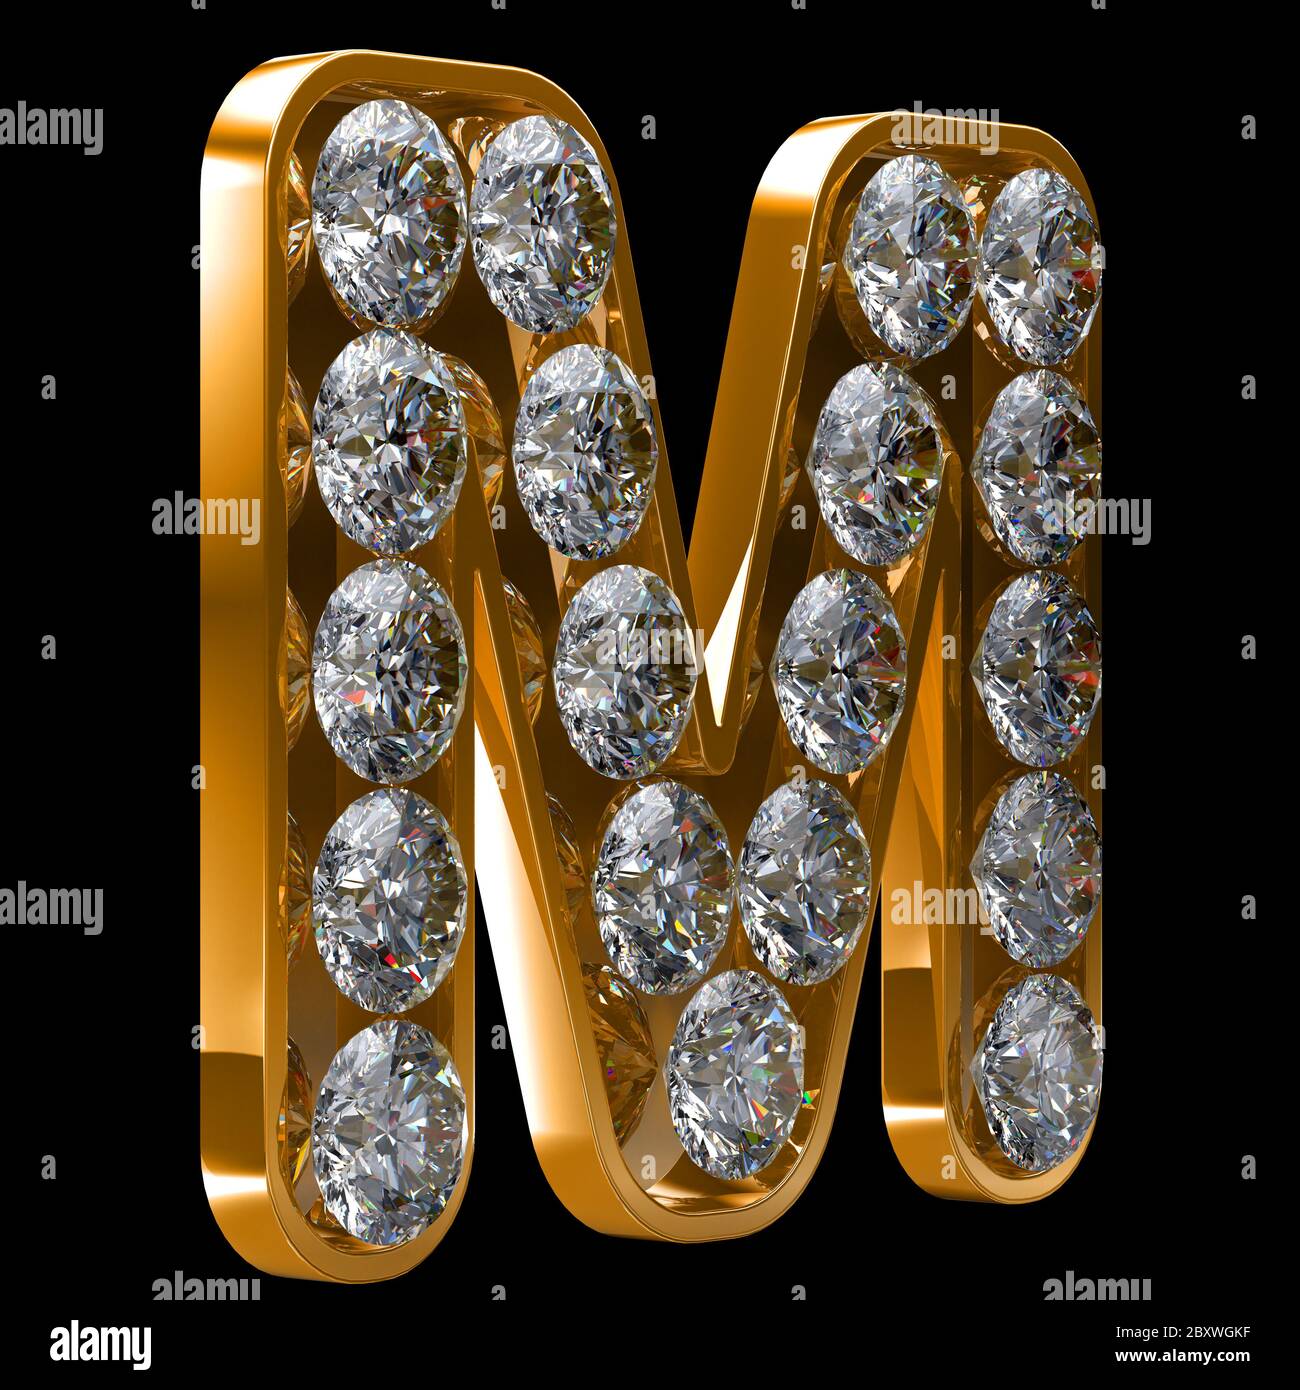 Golden M letter incrusted with diamonds Stock Photo - Alamy